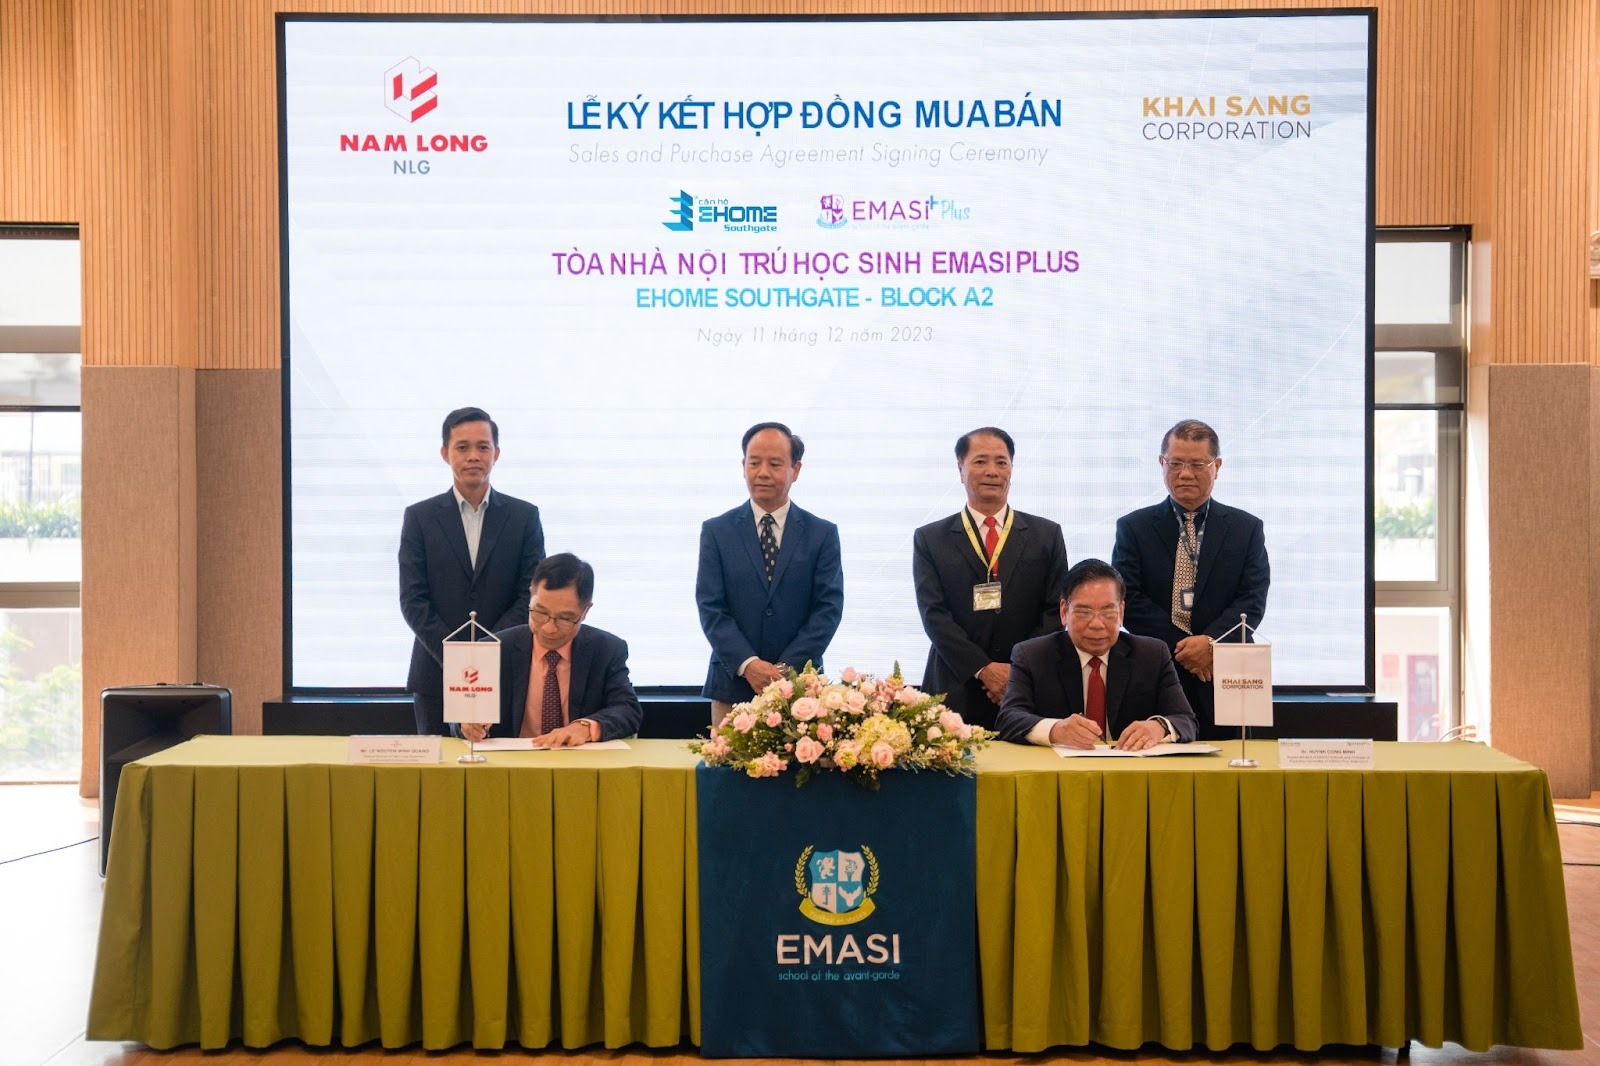 Together make housing affordable again: Khai Sang Group purchases one block of apartments in EHome Southgate at 1 billion dong each